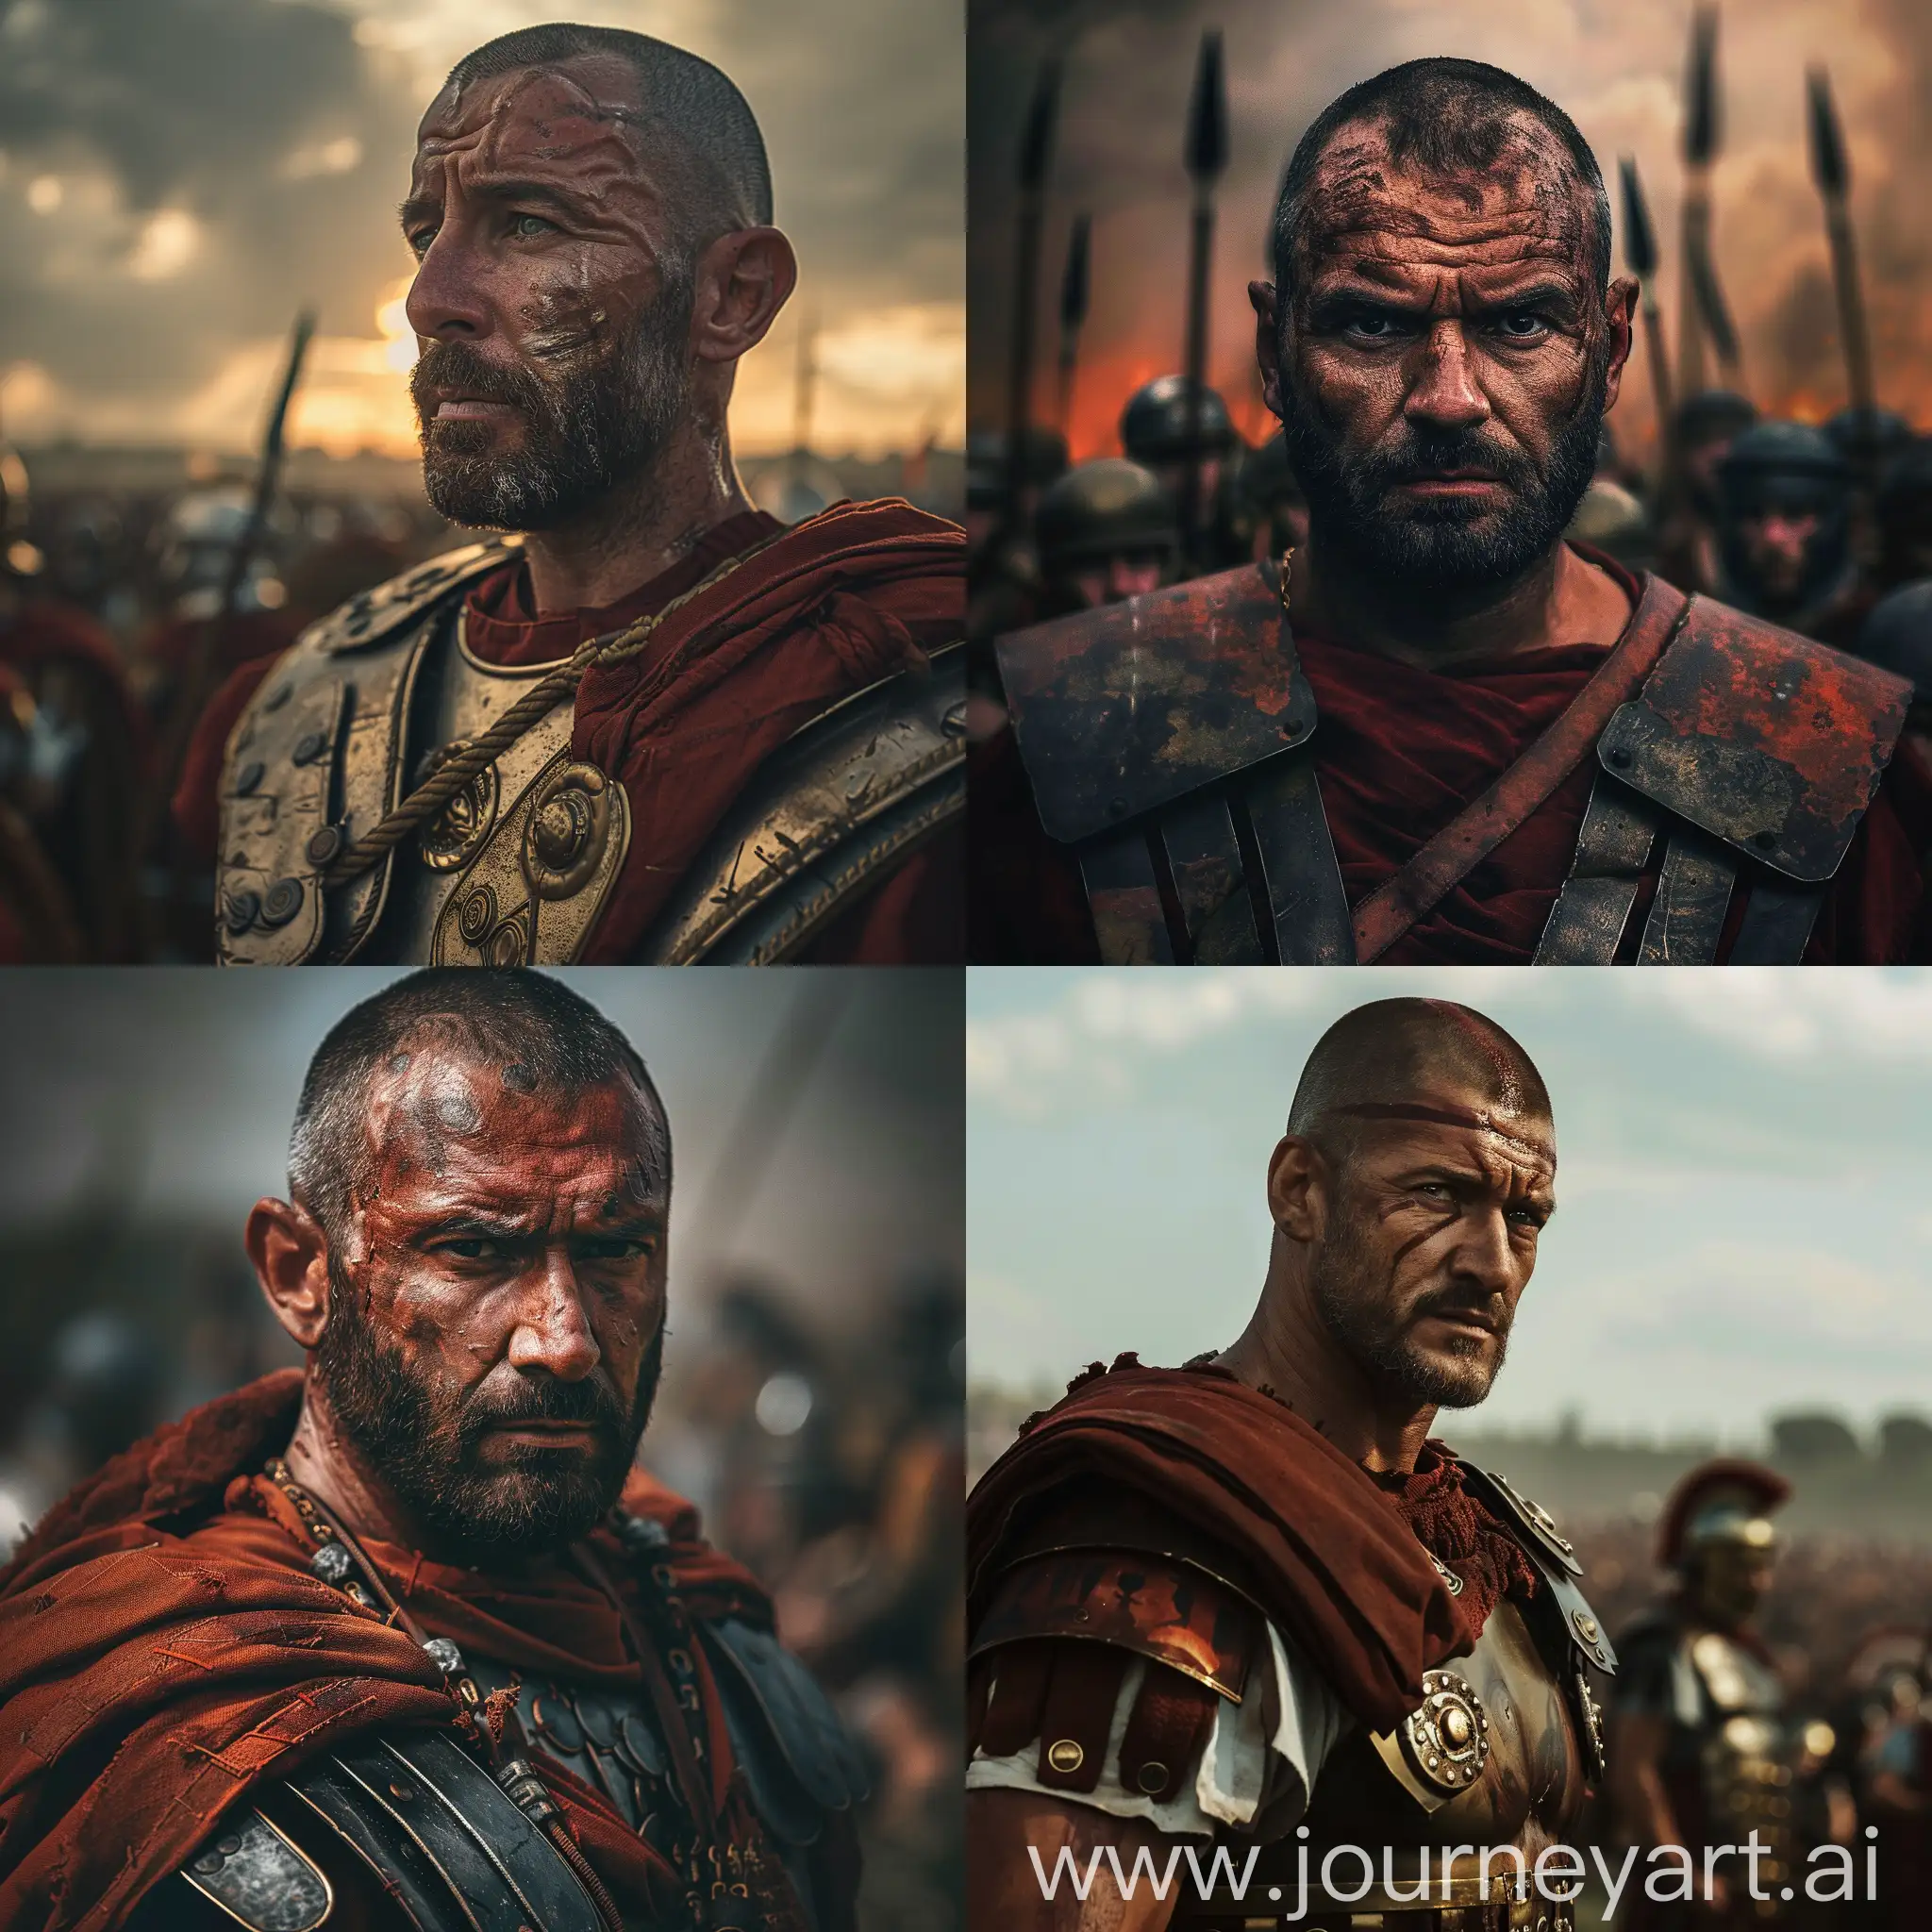 34 years old Roman General at battle field, depicting in Roman General attire, rounded face, beardless, no beard, shaved face, Battle of Zama, cinematic lighting, realistic image